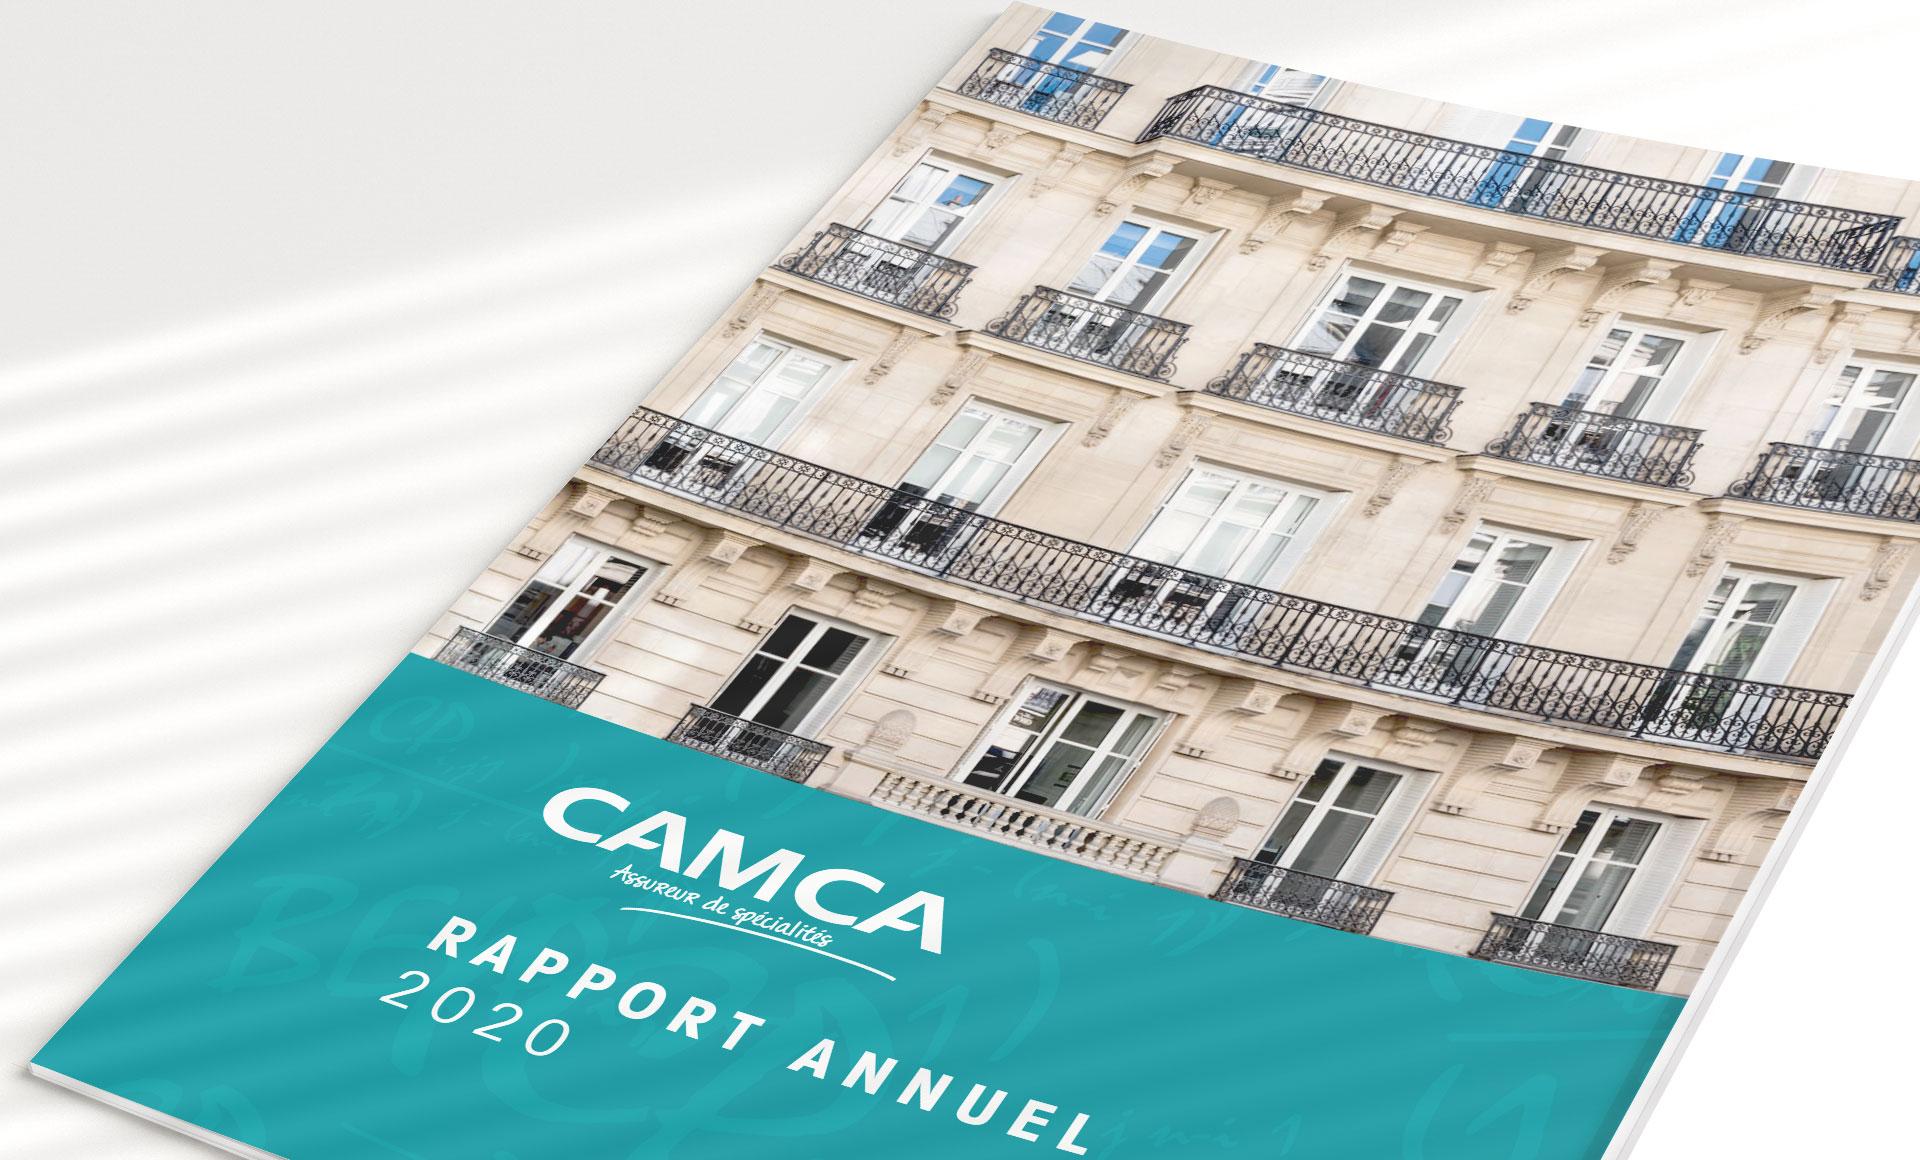 Camca, Rapport annuel 2020